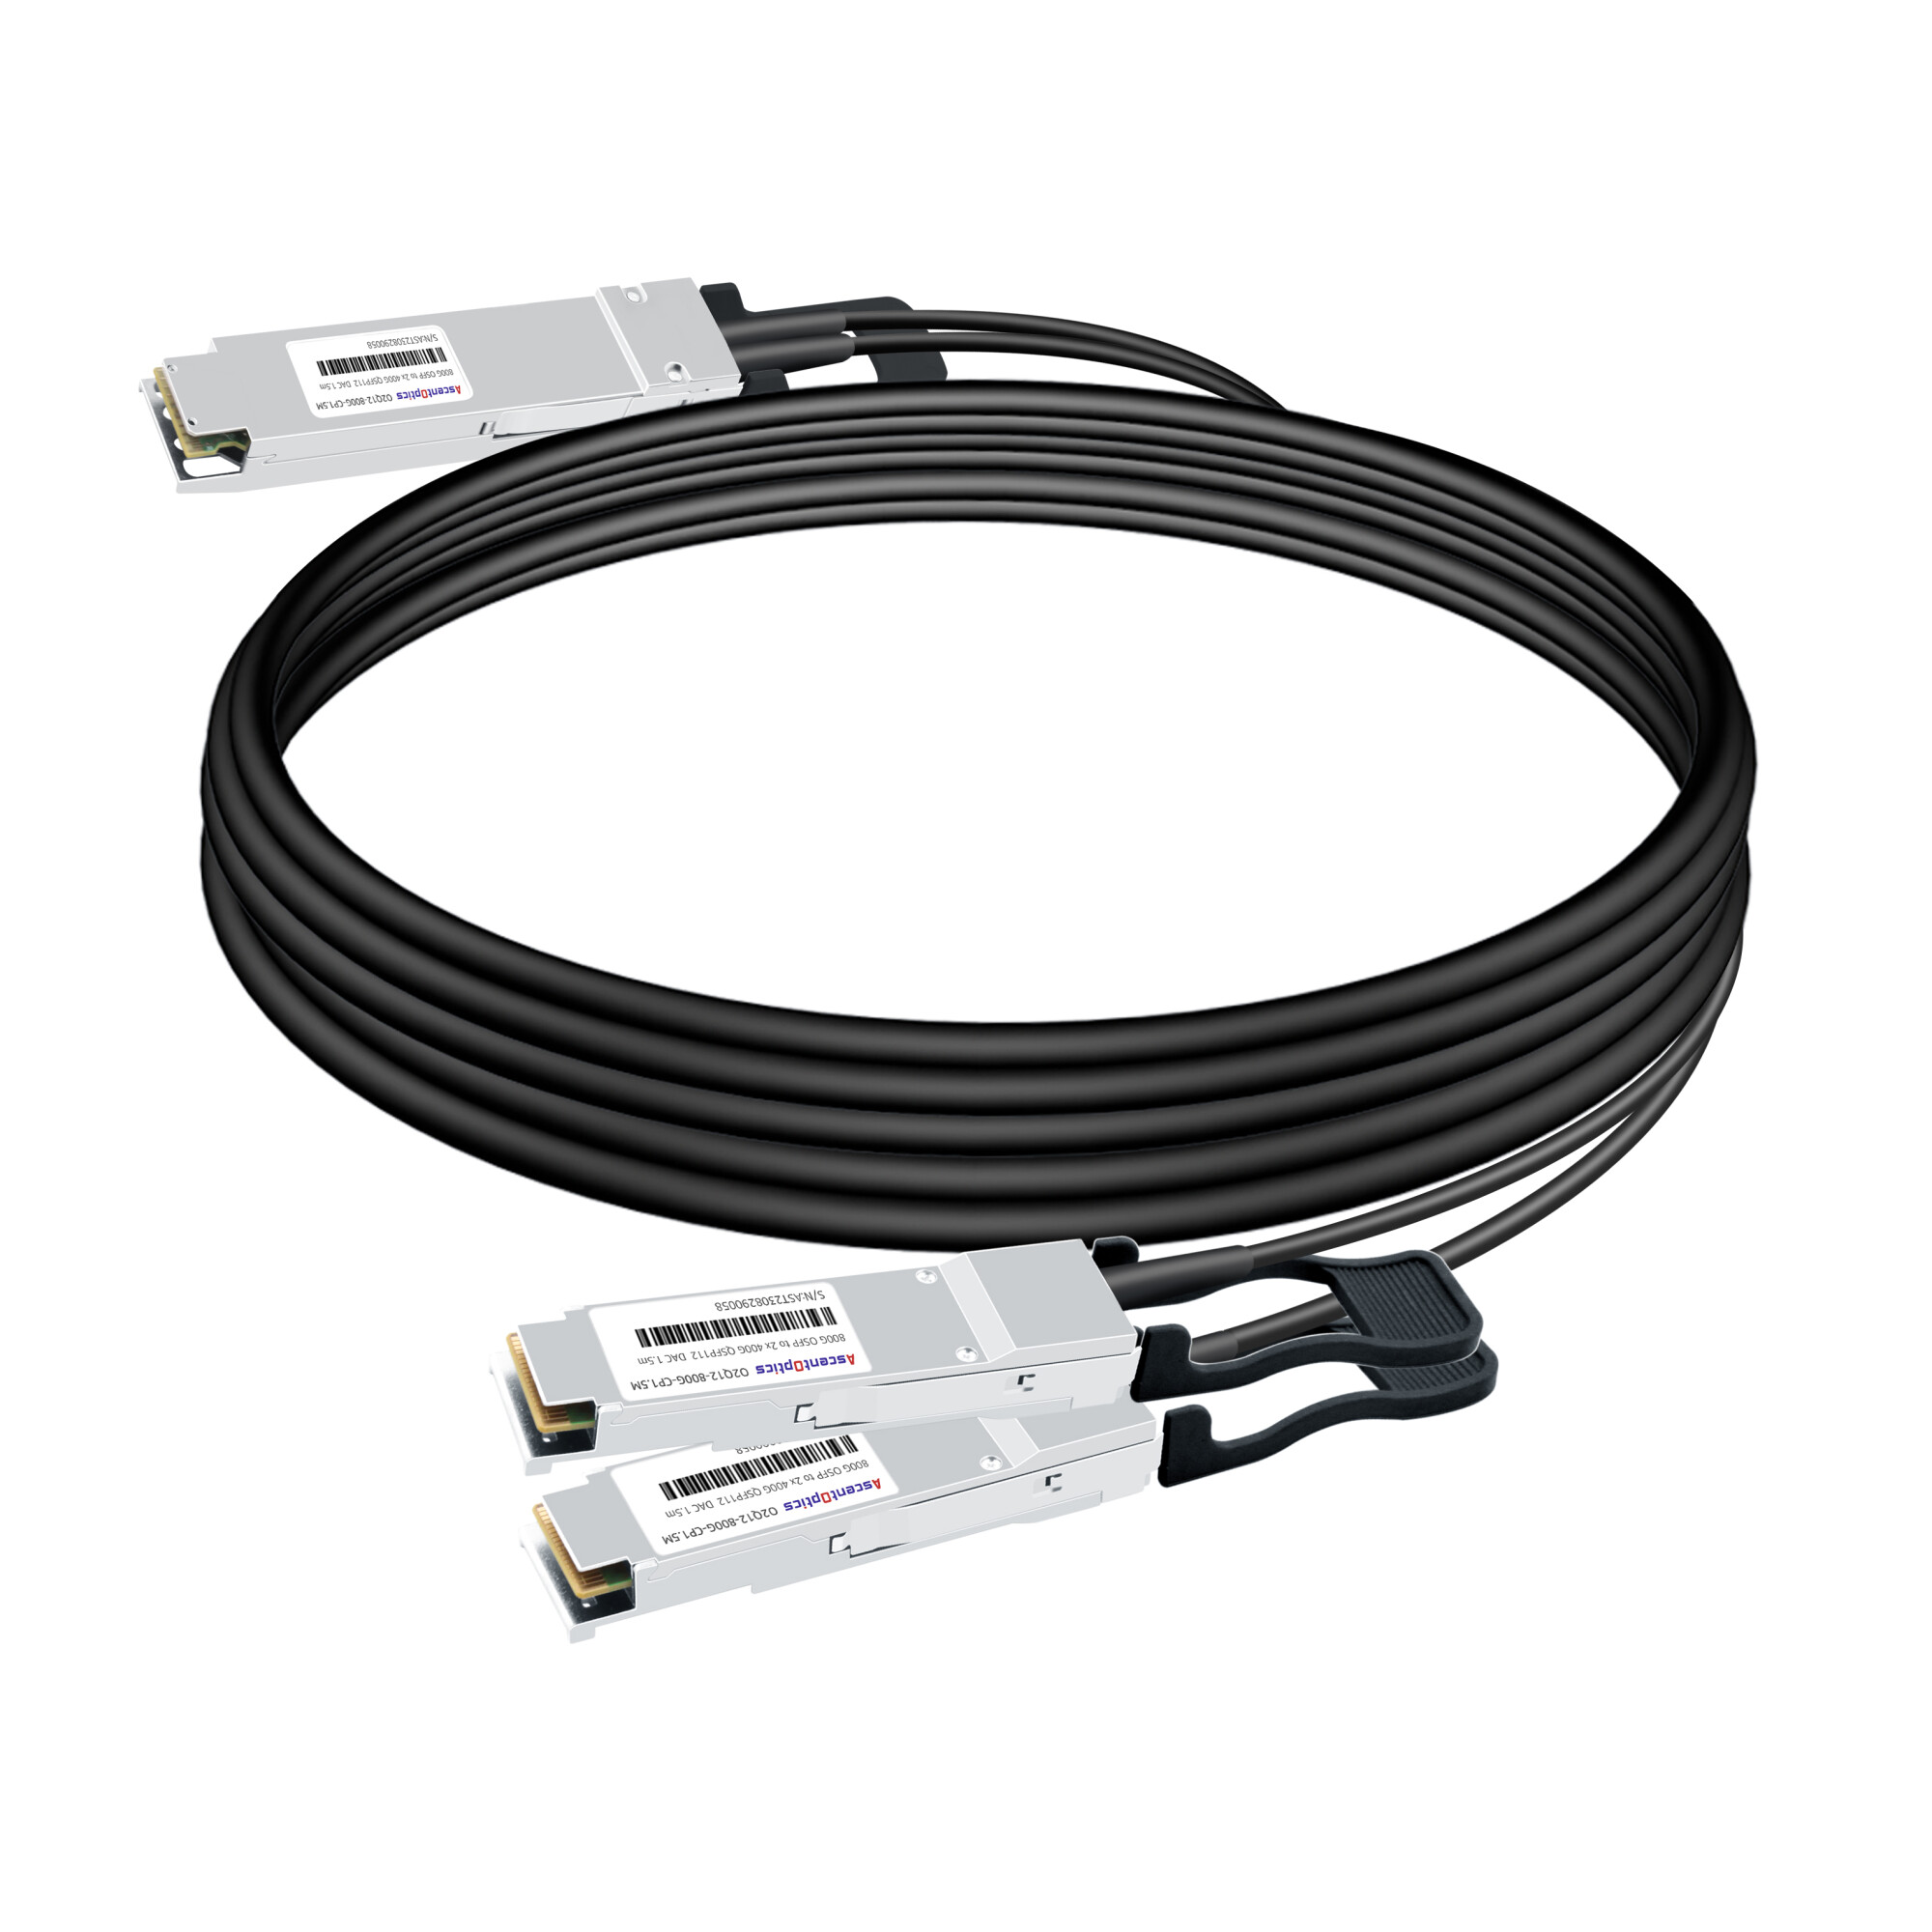 800G OSFP to 2x 400G QSFP112 Copper Breakout Cable,1.5 Meter